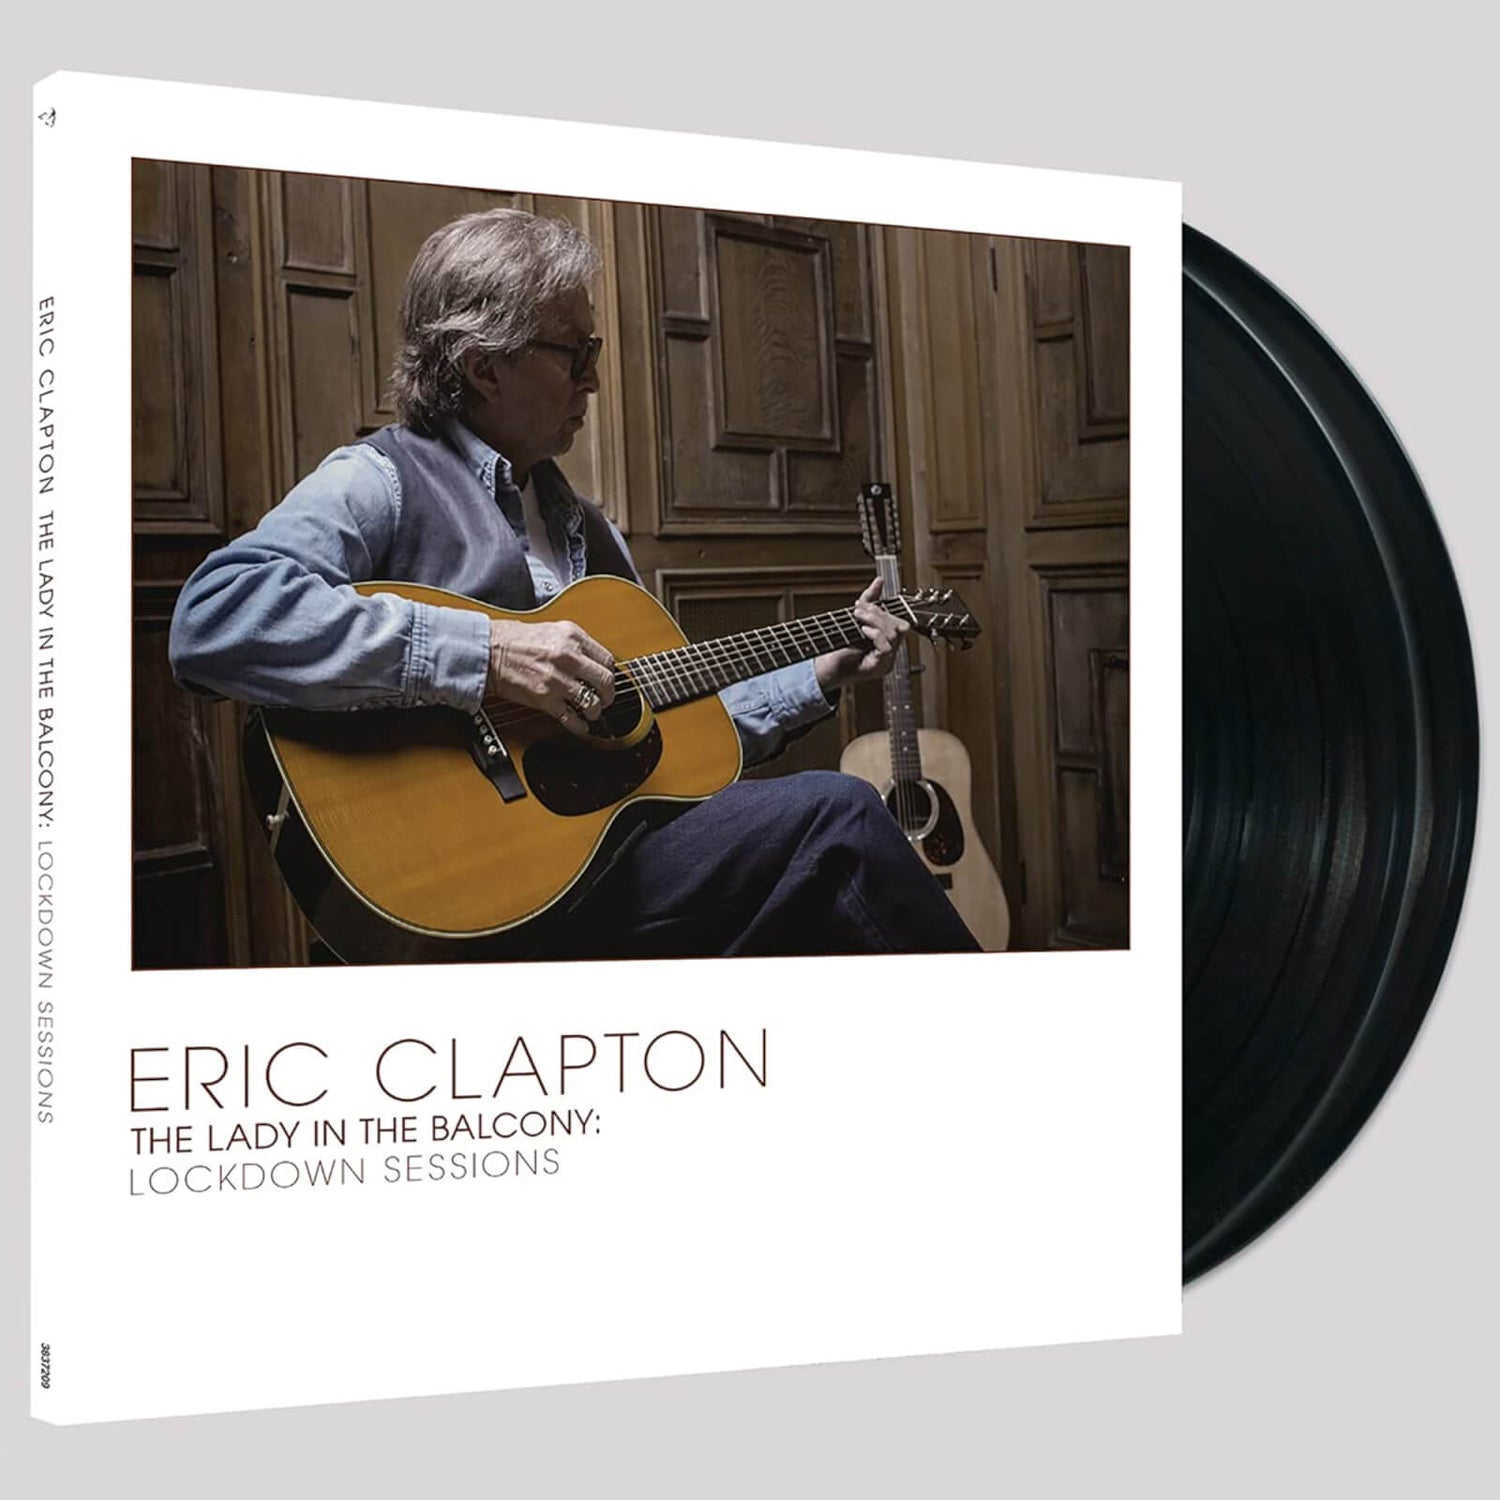 Eric Clapton - The Lady In The Balcony: Lockdown Sessions Vinyl Set